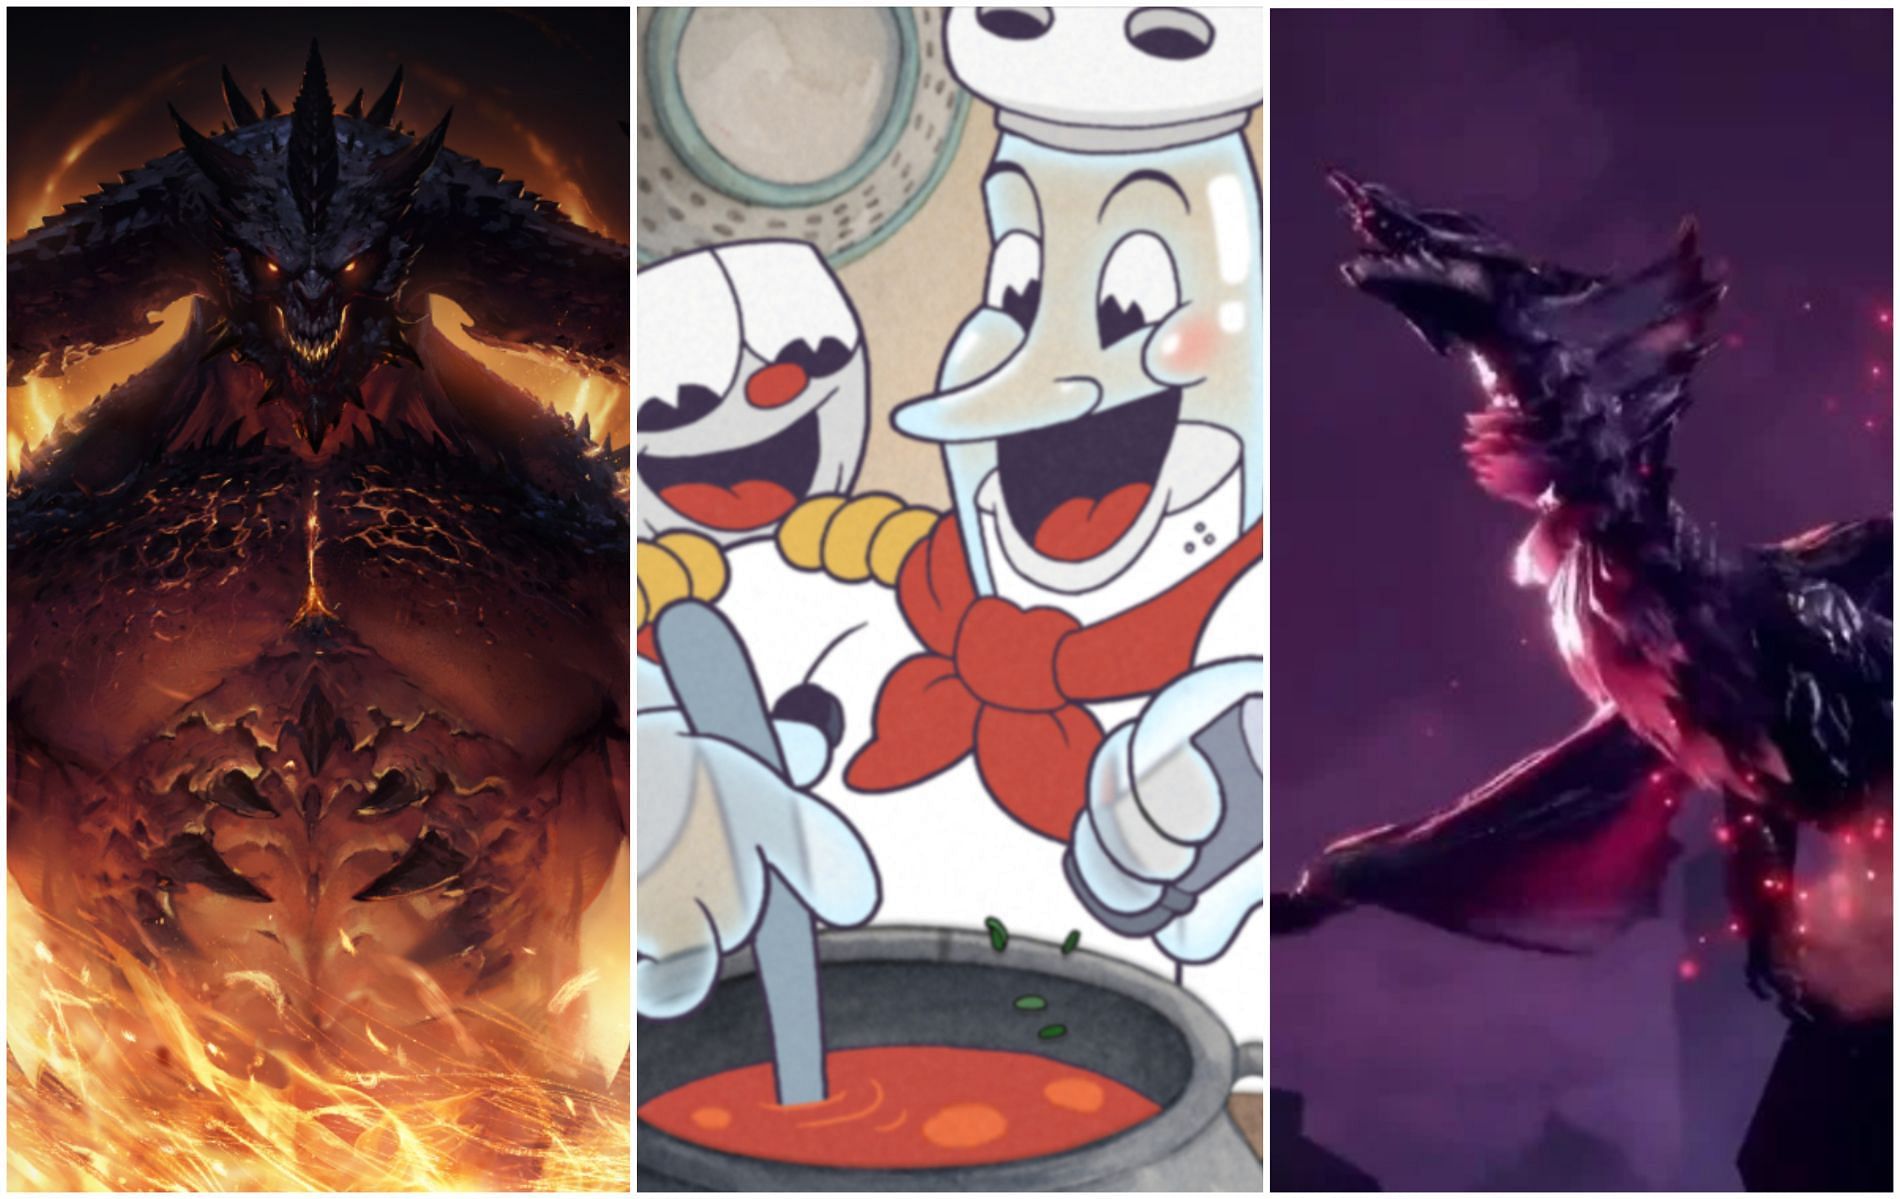 Diablo Immortal, Cuphead, and Monster Hunter Rise are part of the June 2022 line-up (Images by Blizzard, Studio MDHR, and Capcom)